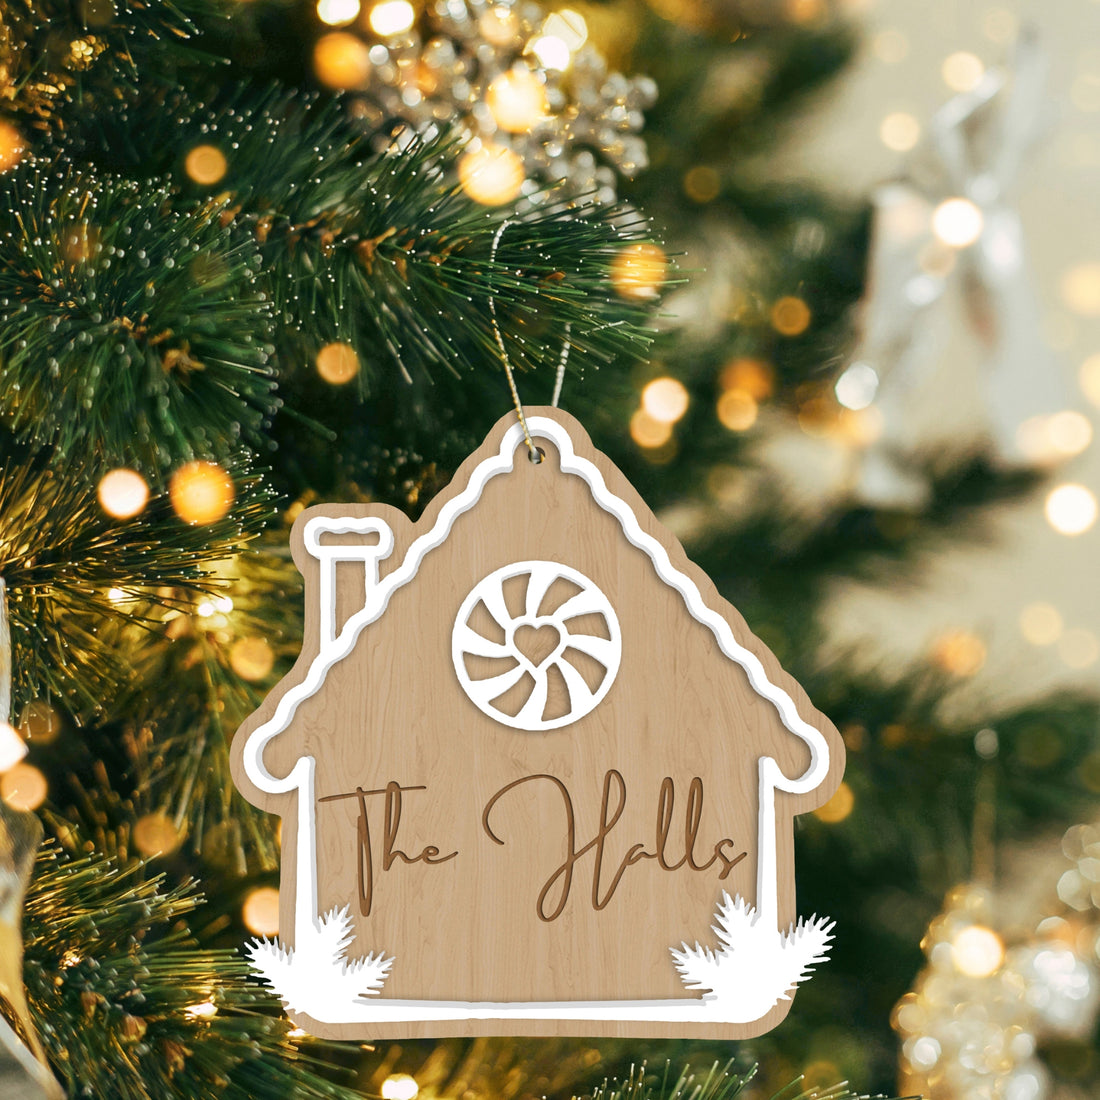 Personalised Double Layer Wood Gingerbread House Christmas Bauble, Custom Engraved Name Hanging Tree Ornament, Housewarming Decor Gift Tag